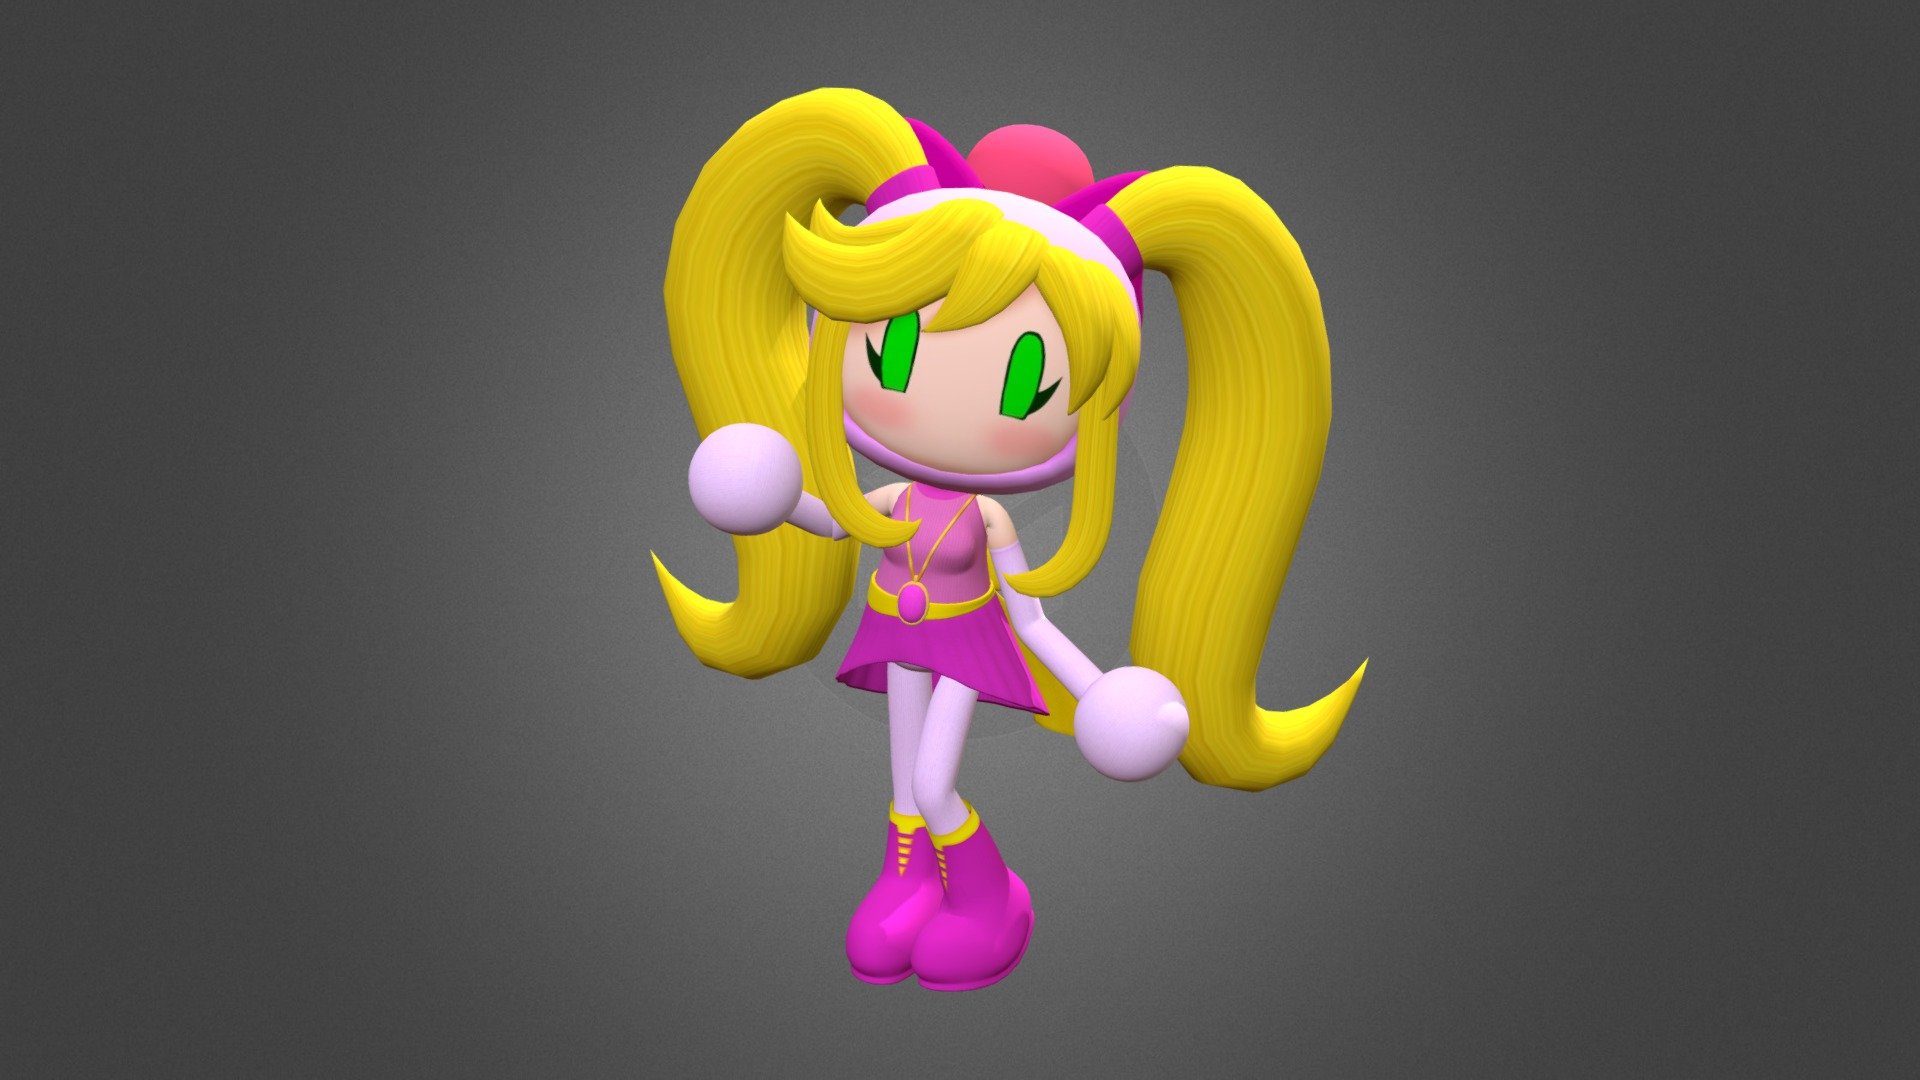 This is not an official character

ShizenBomber

Images of the character file
https://twitter.com/SailorBomber/status/930836521153978370


Visit my Deviantart
https://sailorbomber.deviantart.com/ - ShizenBomber - 3D model by SailorBomber 3d model